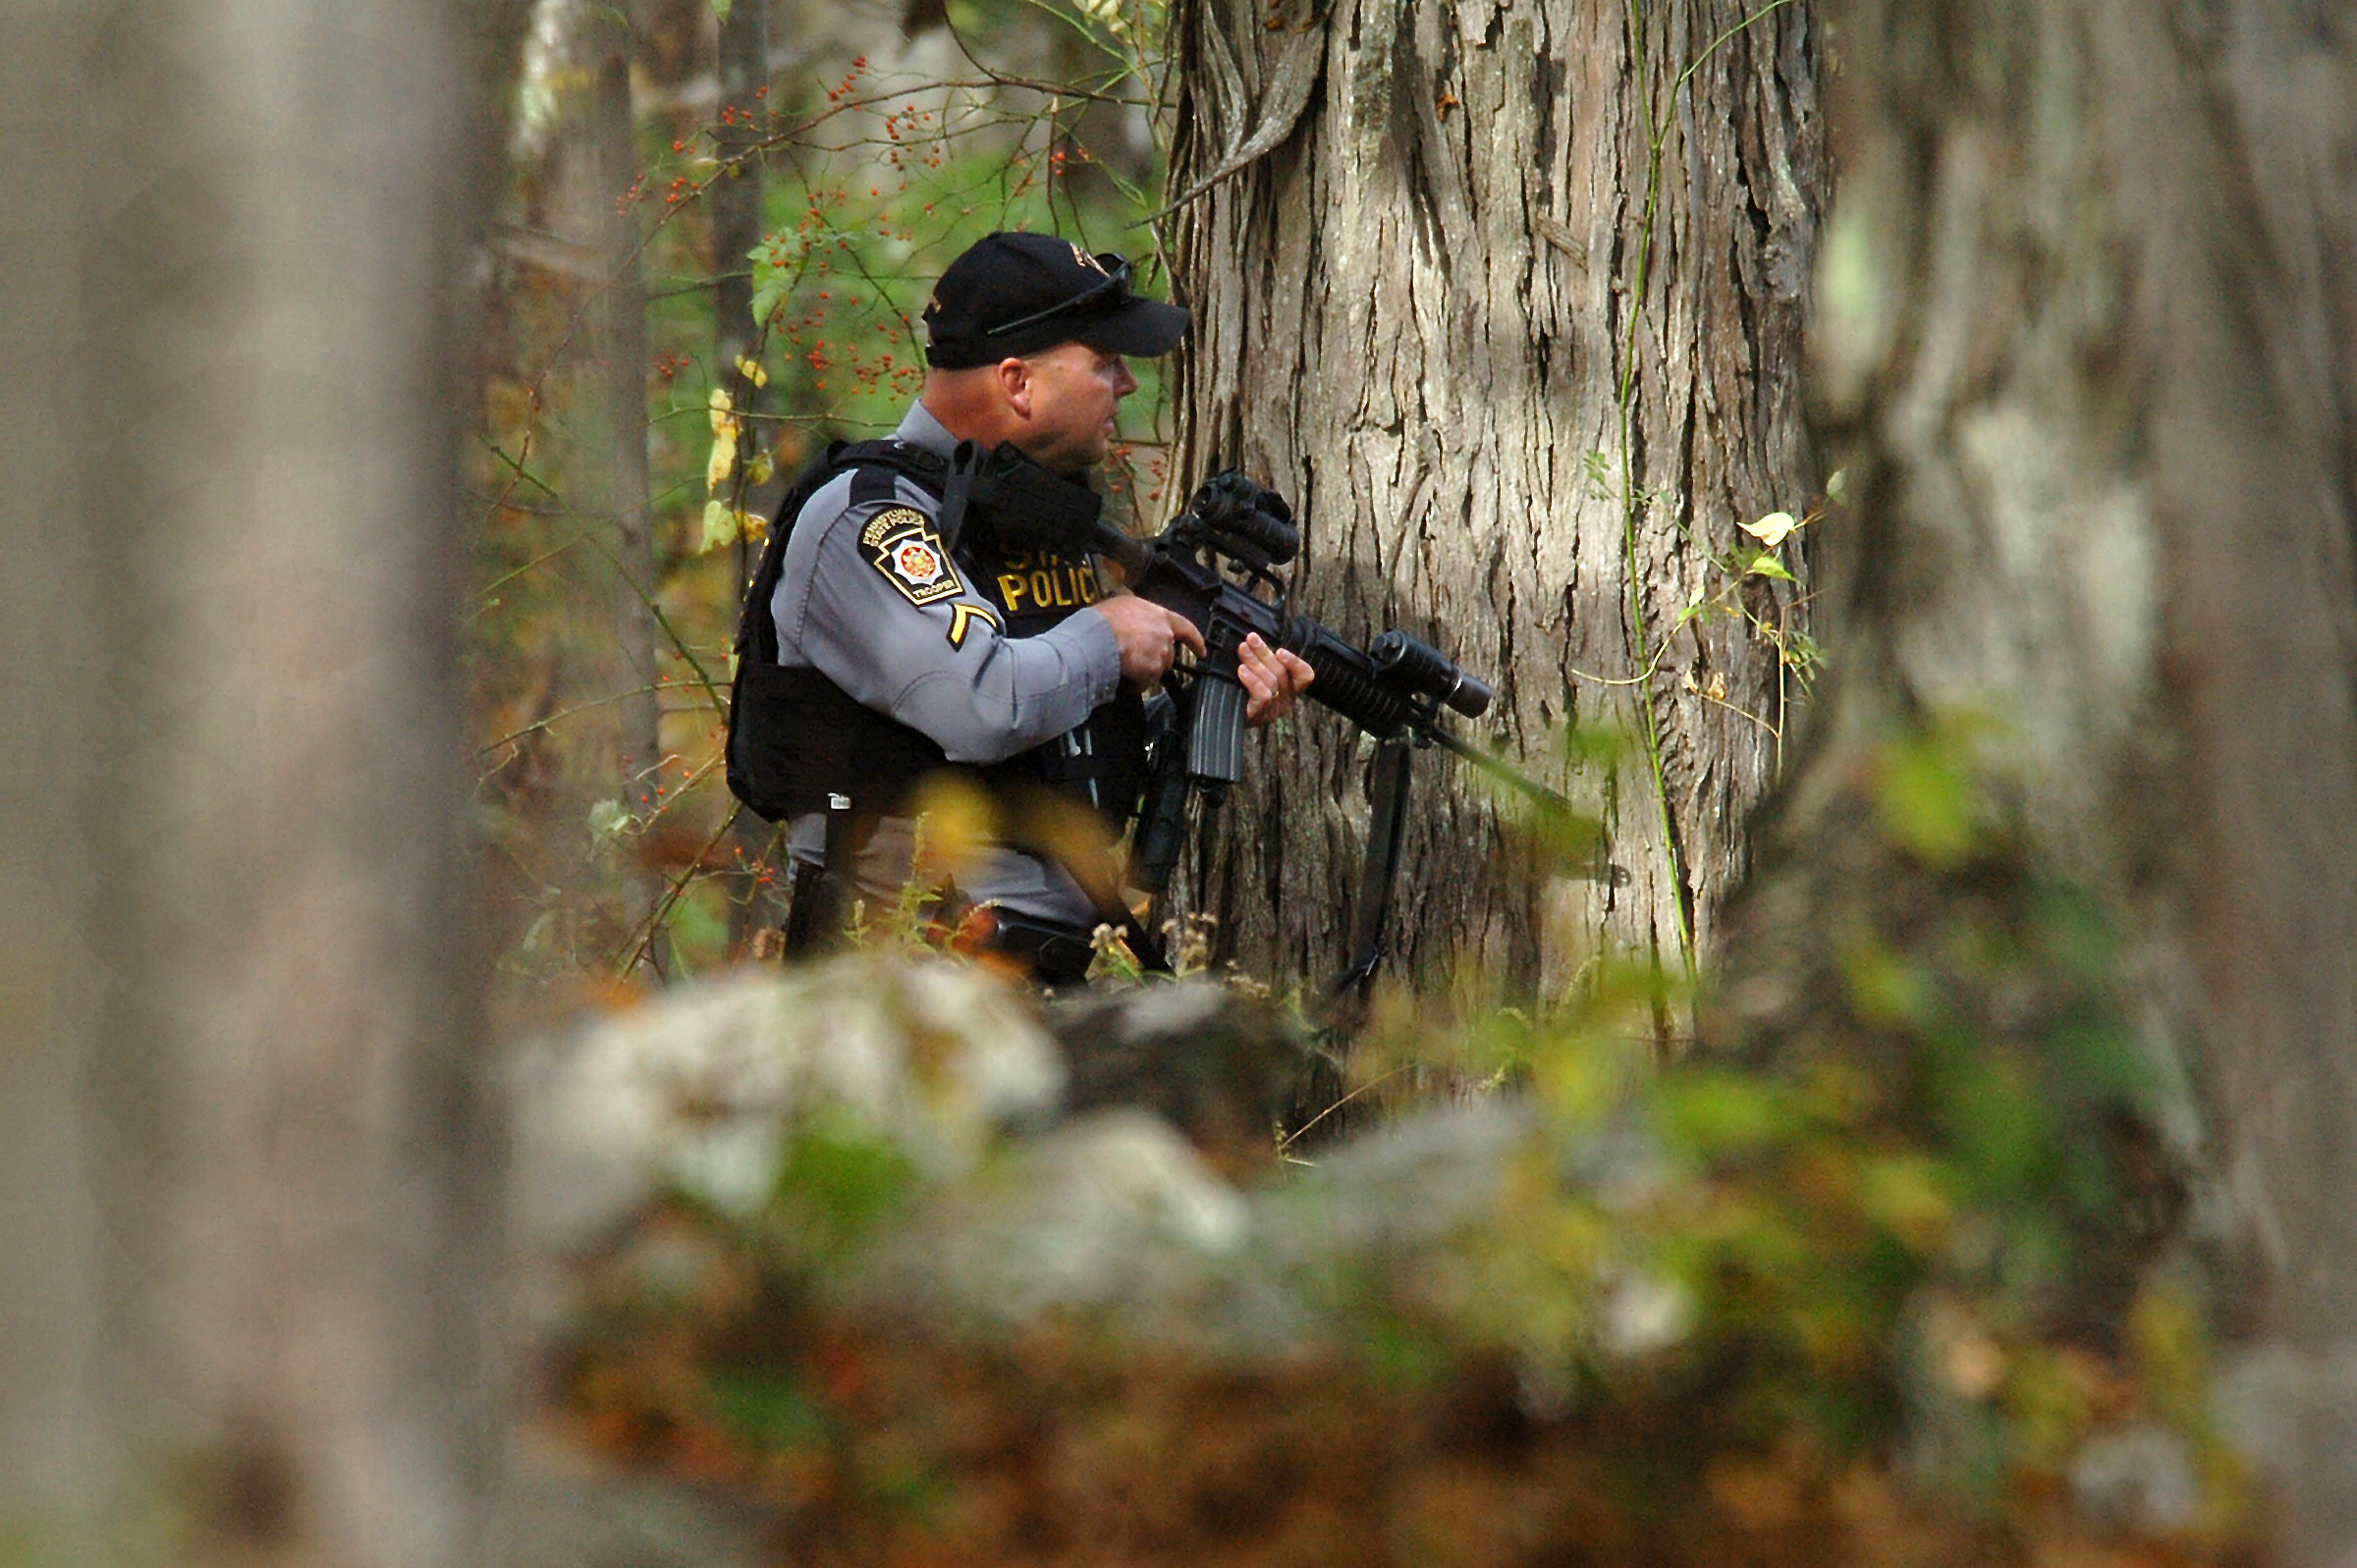 PHOTO: A Pennsylvania State Trooper searches the woods near Lower Swiftwater Road in Swiftwater, Pa., Oct. 18, 2014 during a massive manhunt for killer Eric Frein.